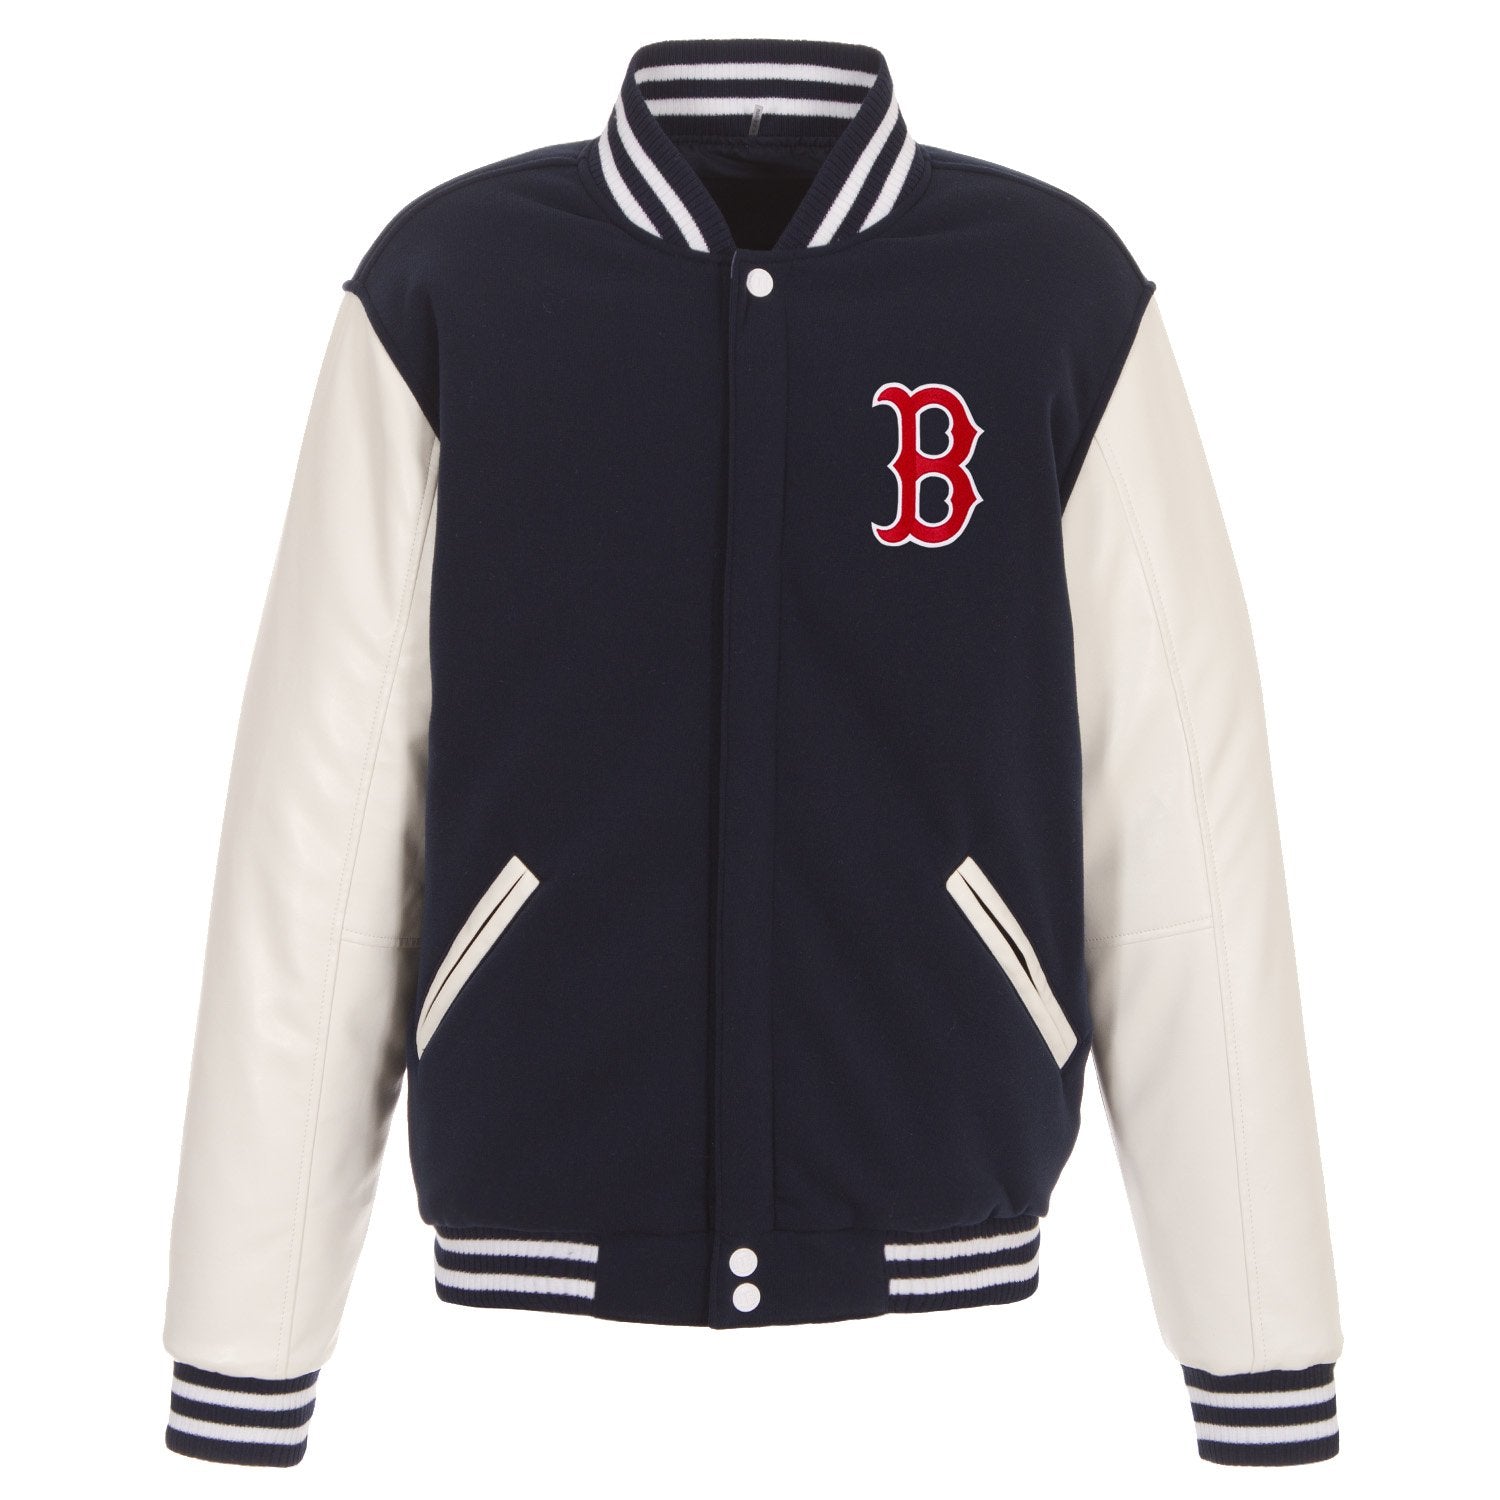 Atlanta Braves - JH Design Reversible Fleece Jacket with Faux Leather  Sleeves - Navy/White